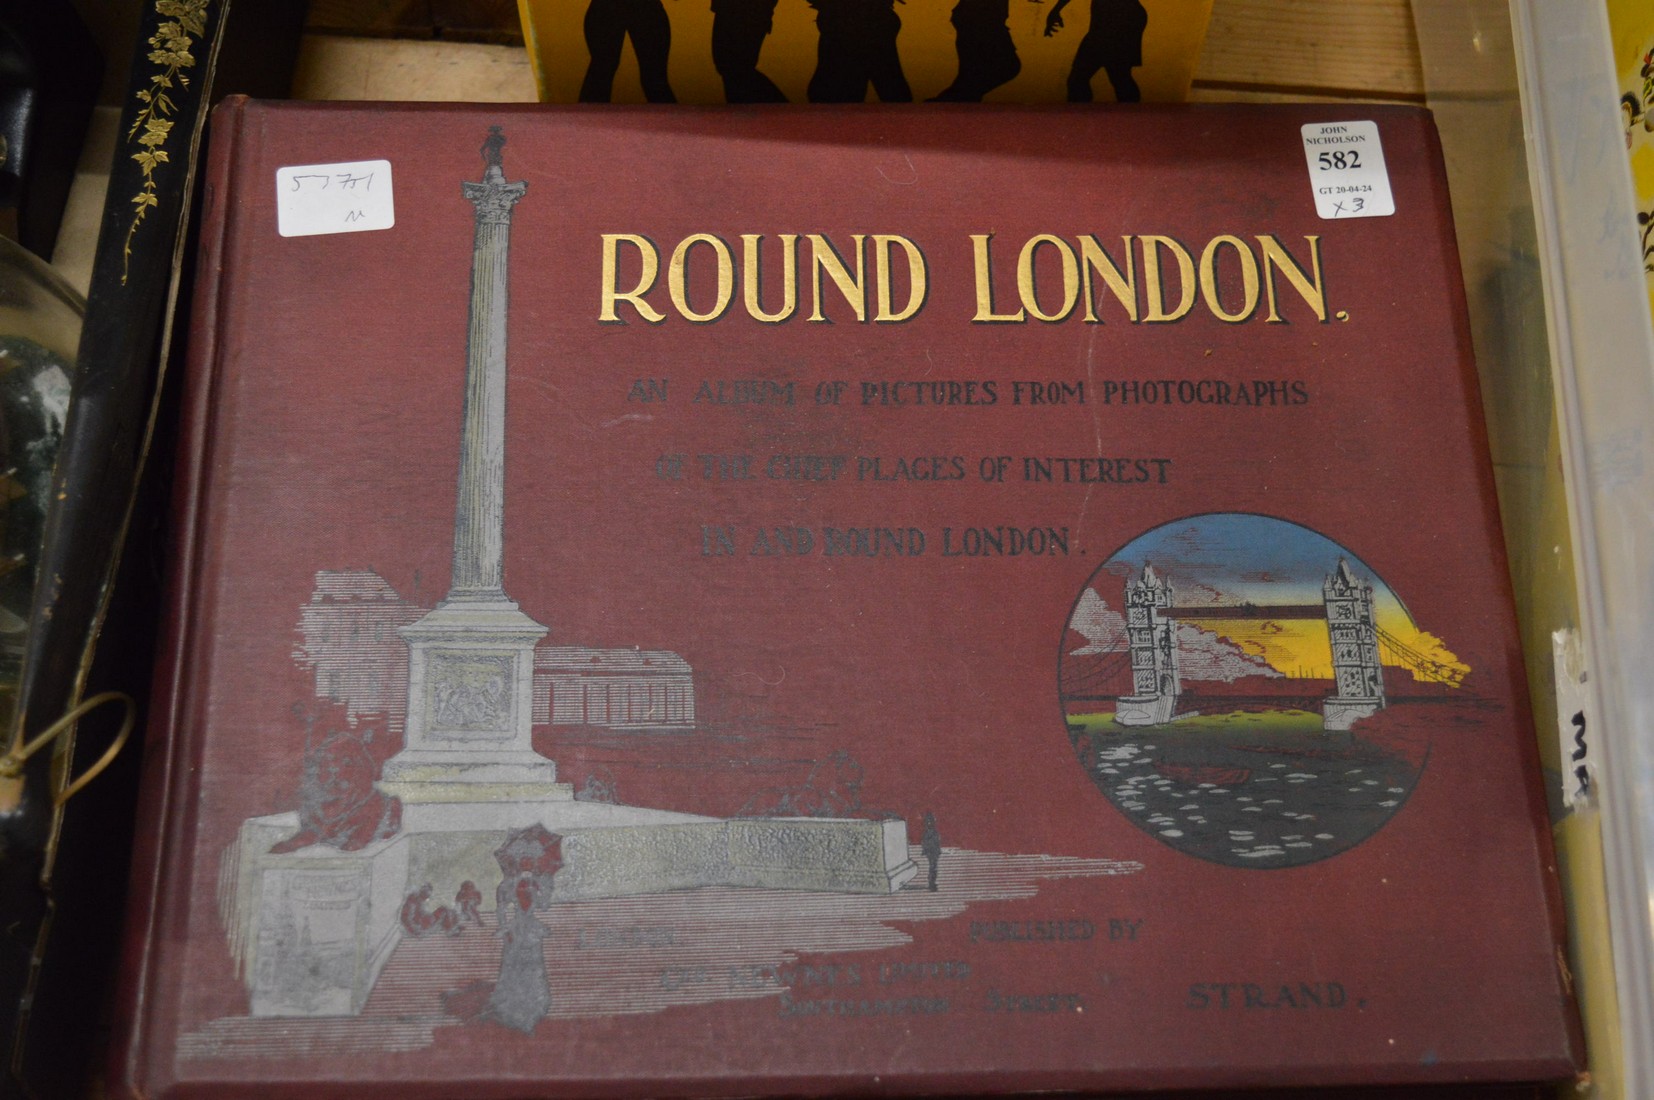 Round London, an album of pictures from the photographs together with another volume Round the coast